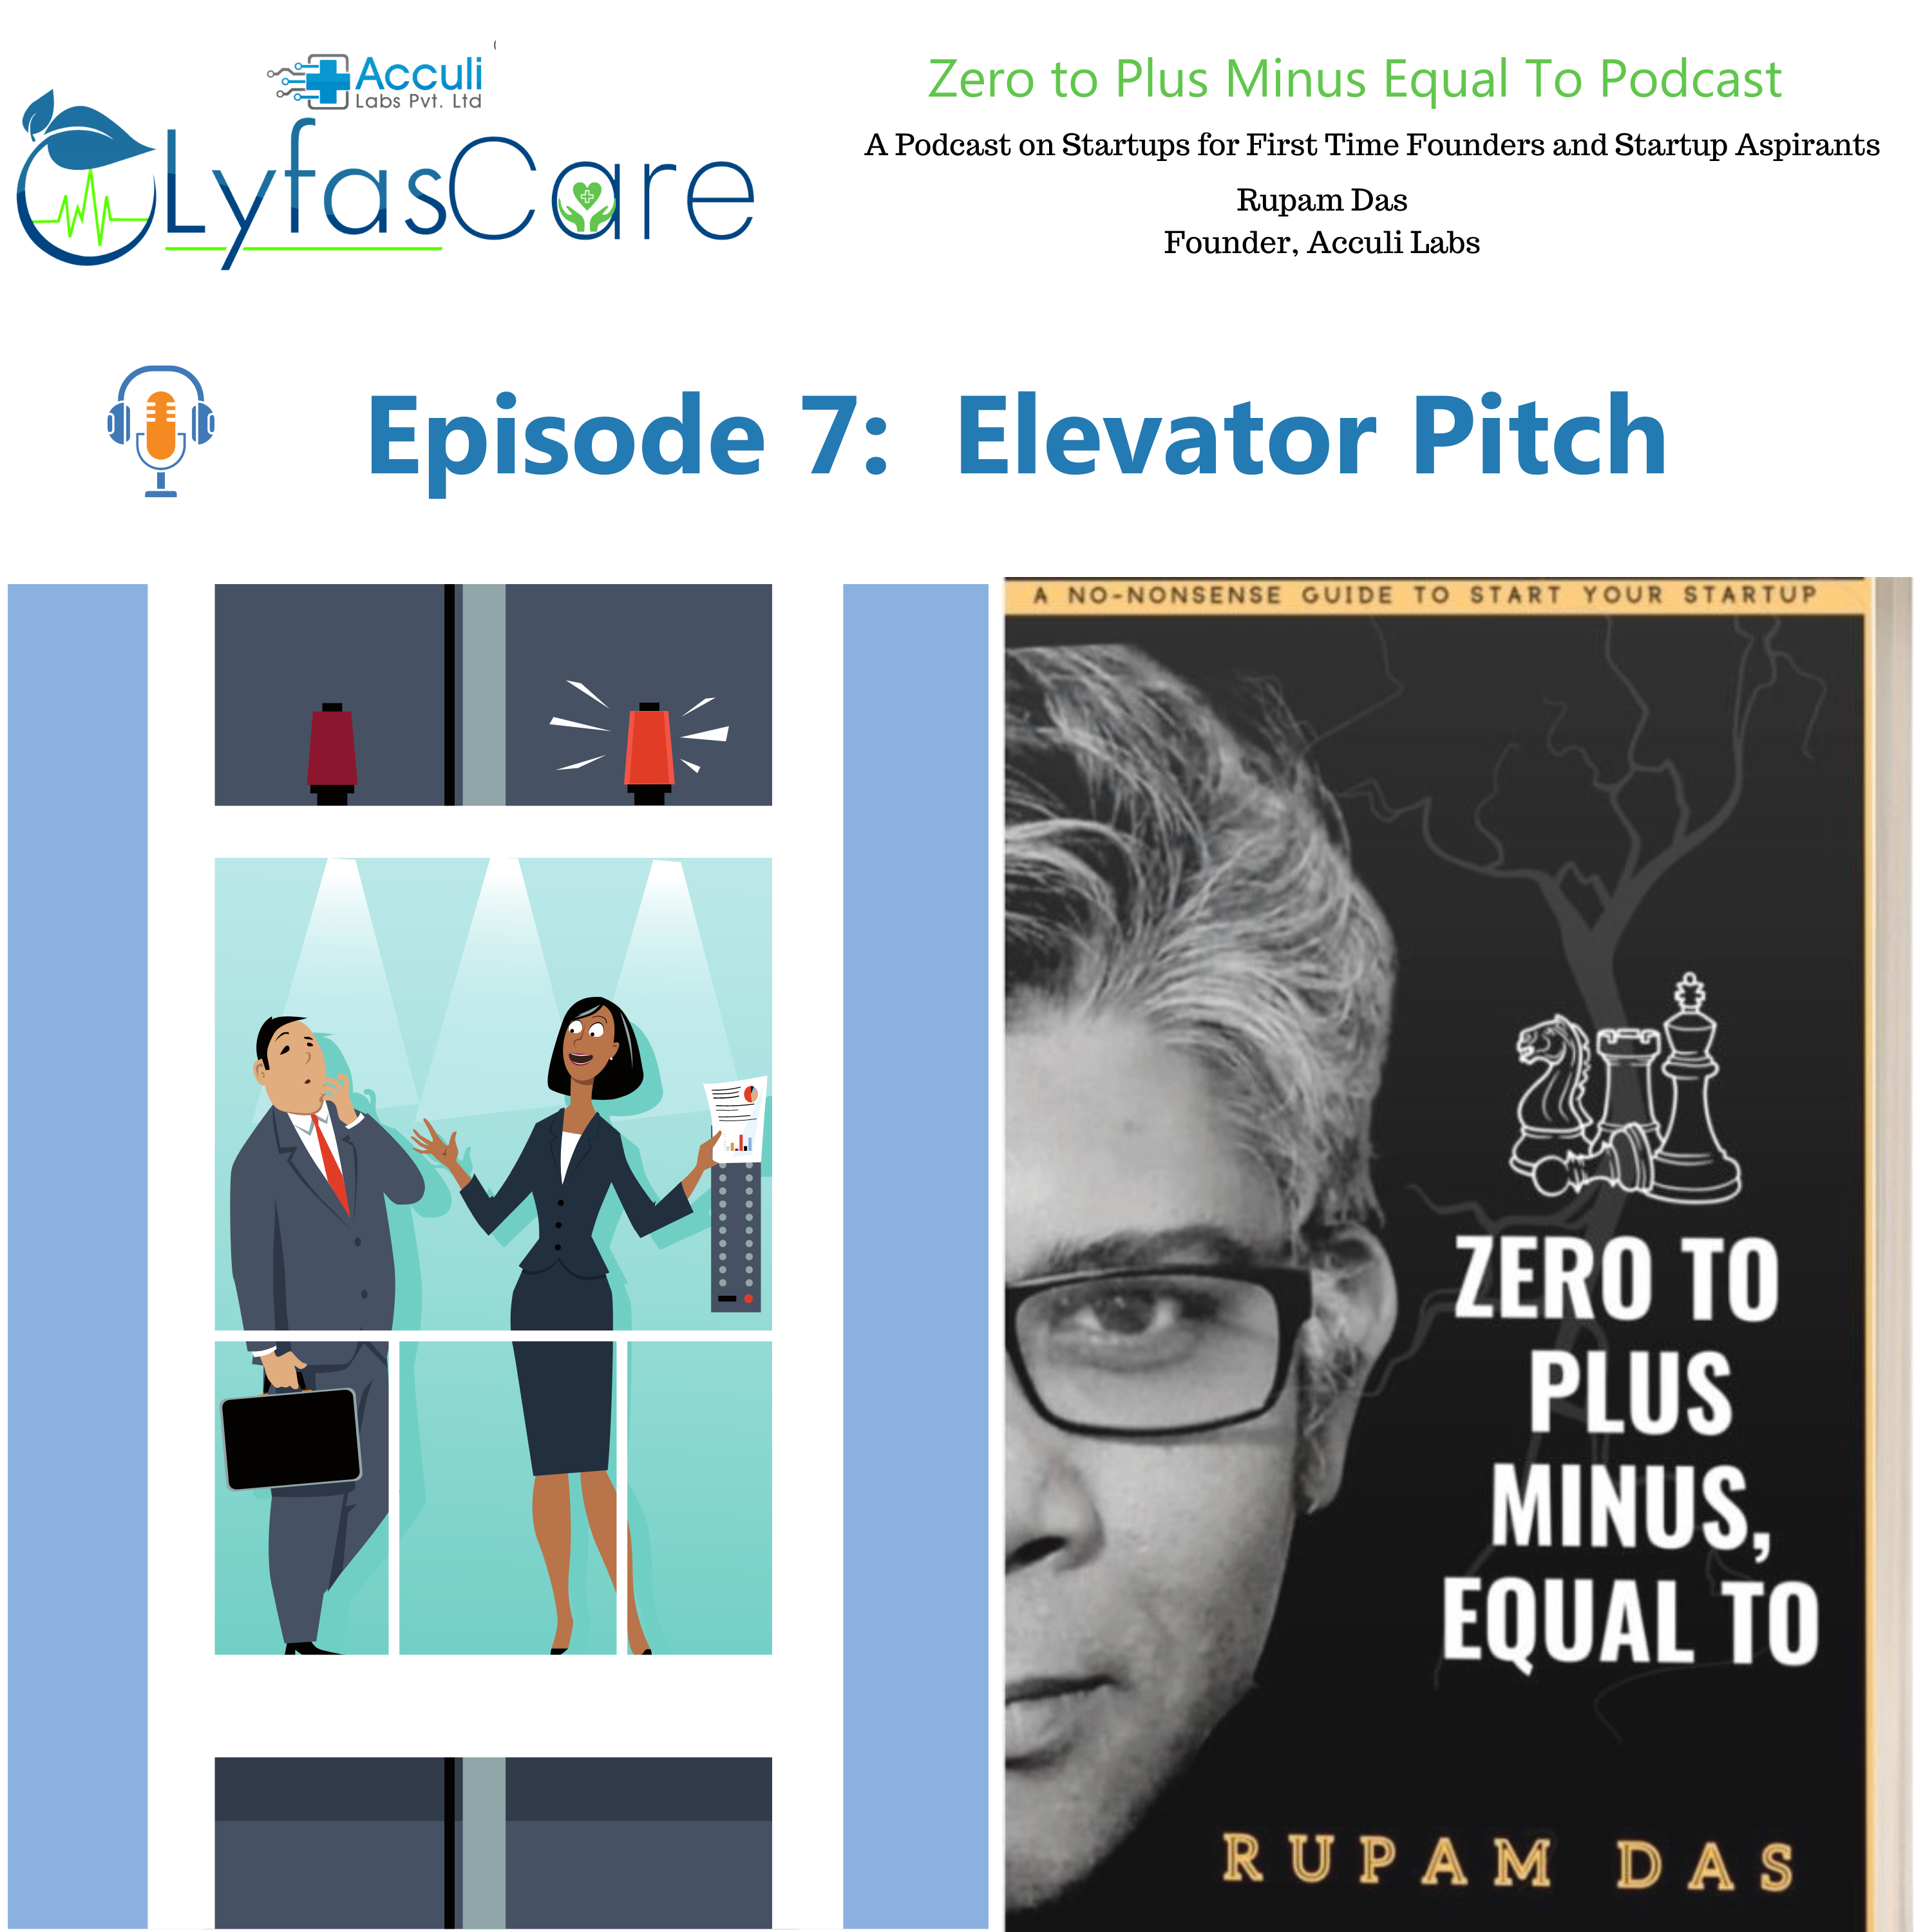 Zero to Plus Minus Equal to Book by Rupam Das now has a podcast in Zero to Plus Minus Equal to Startup Podcast in whose banner a cartoon photo of a lady founder pitching to an investor in the elevator is show.